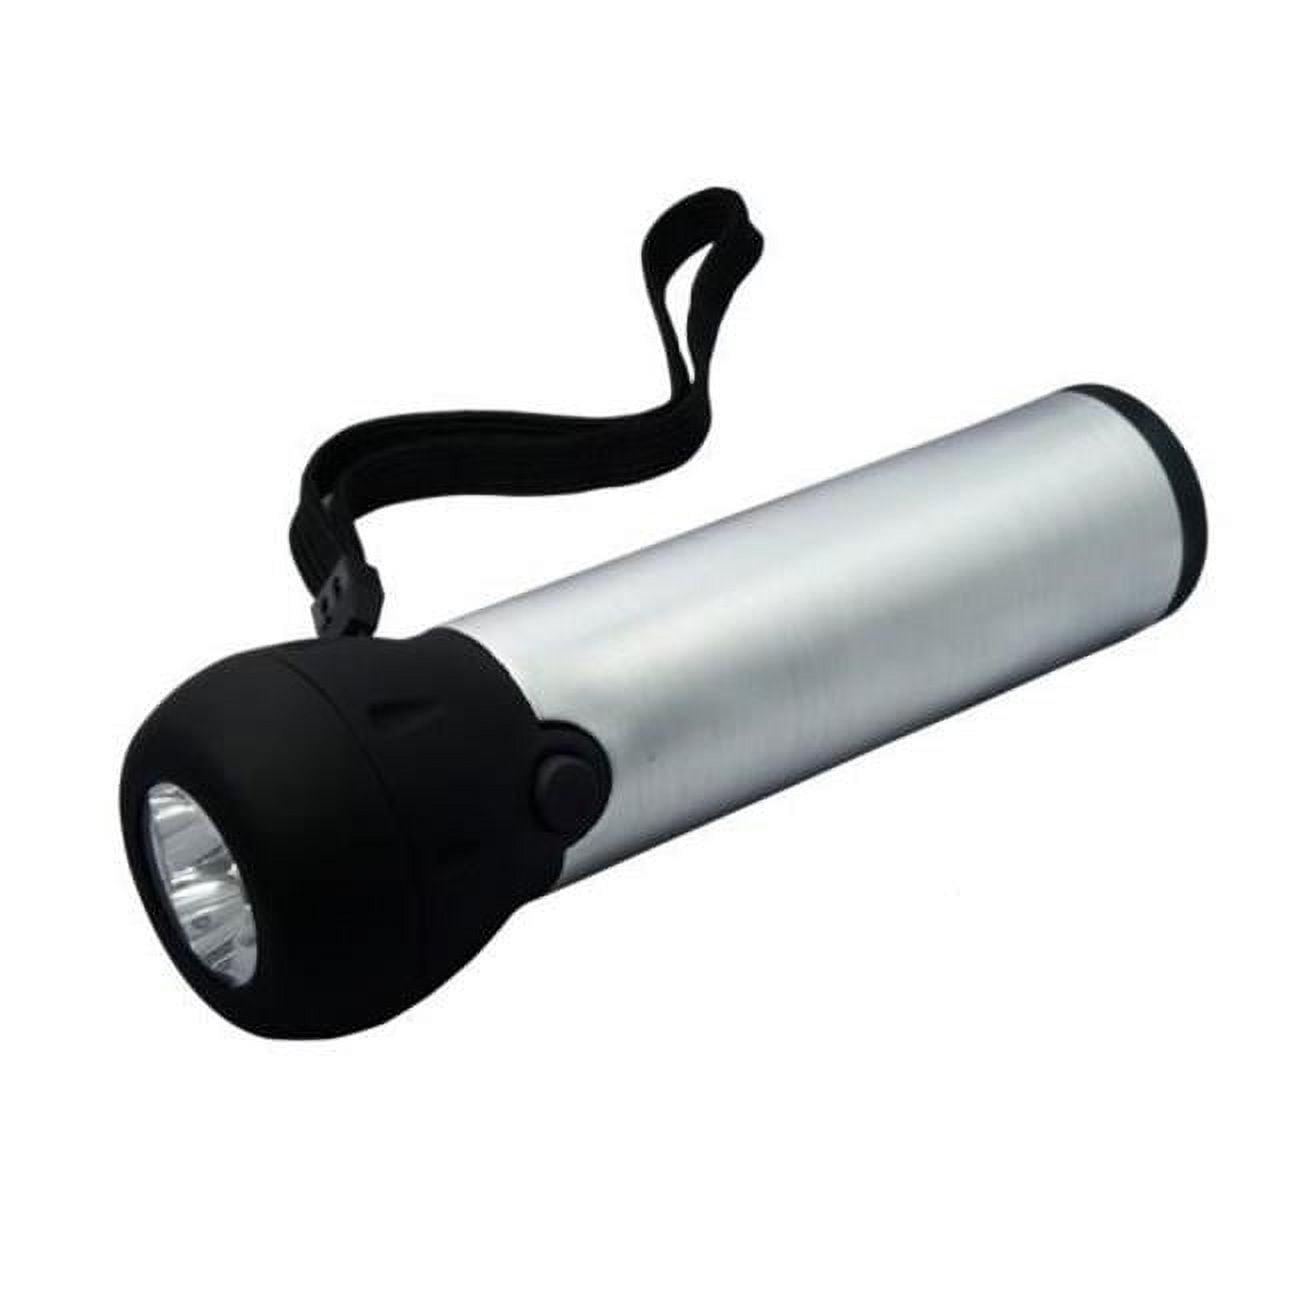 Picture of Jiallo 11711 Swing LED Rechargeable Torch